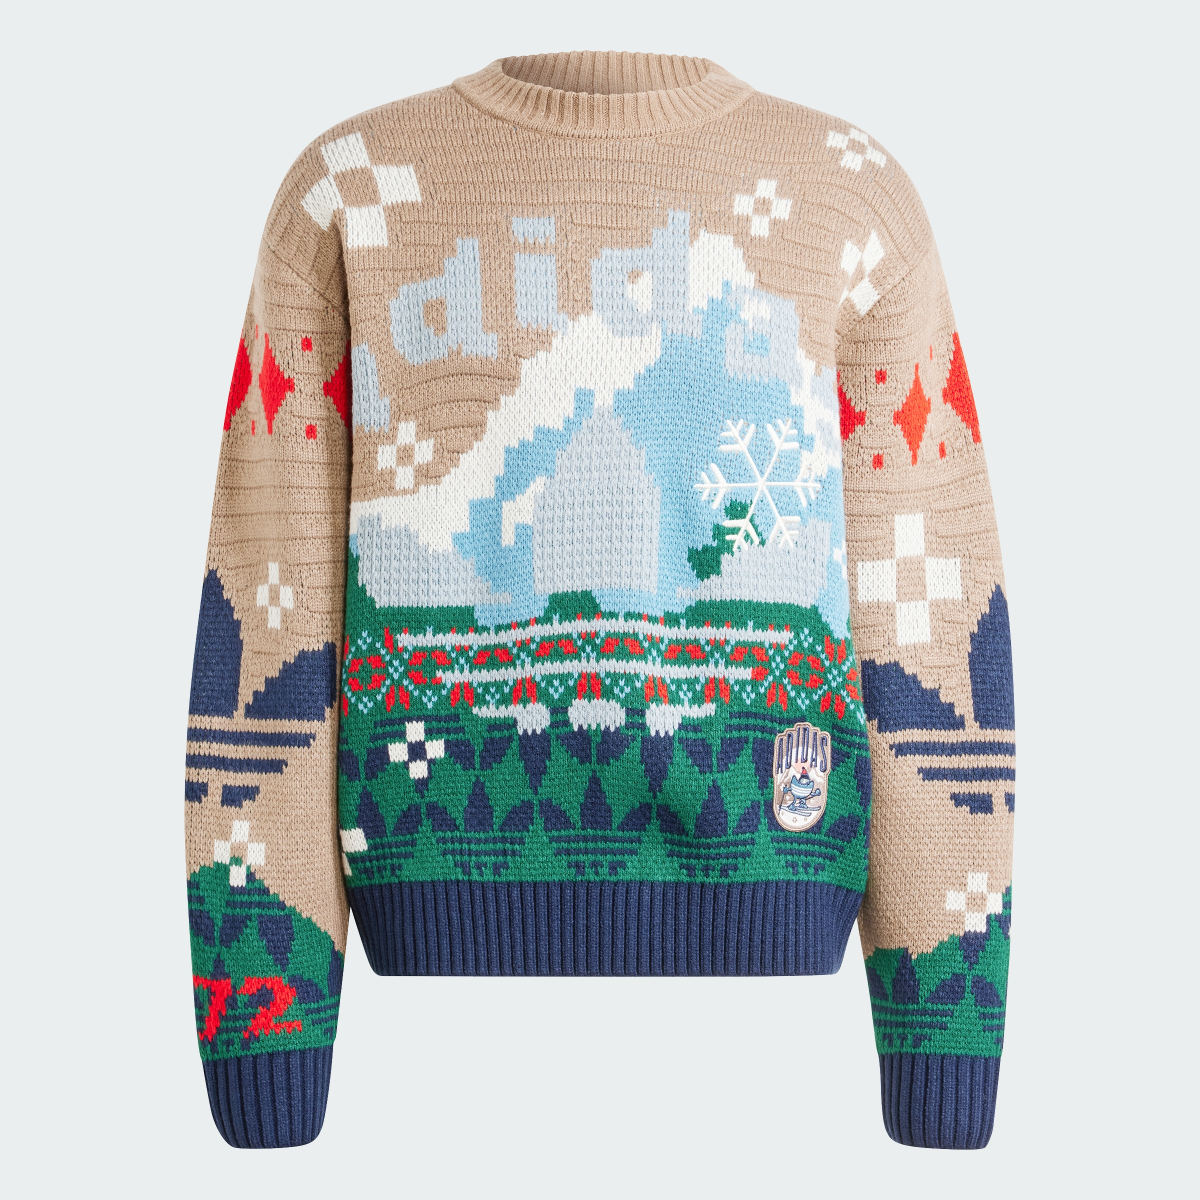 Adidas Holiday Sweater (Gender Neutral). 4